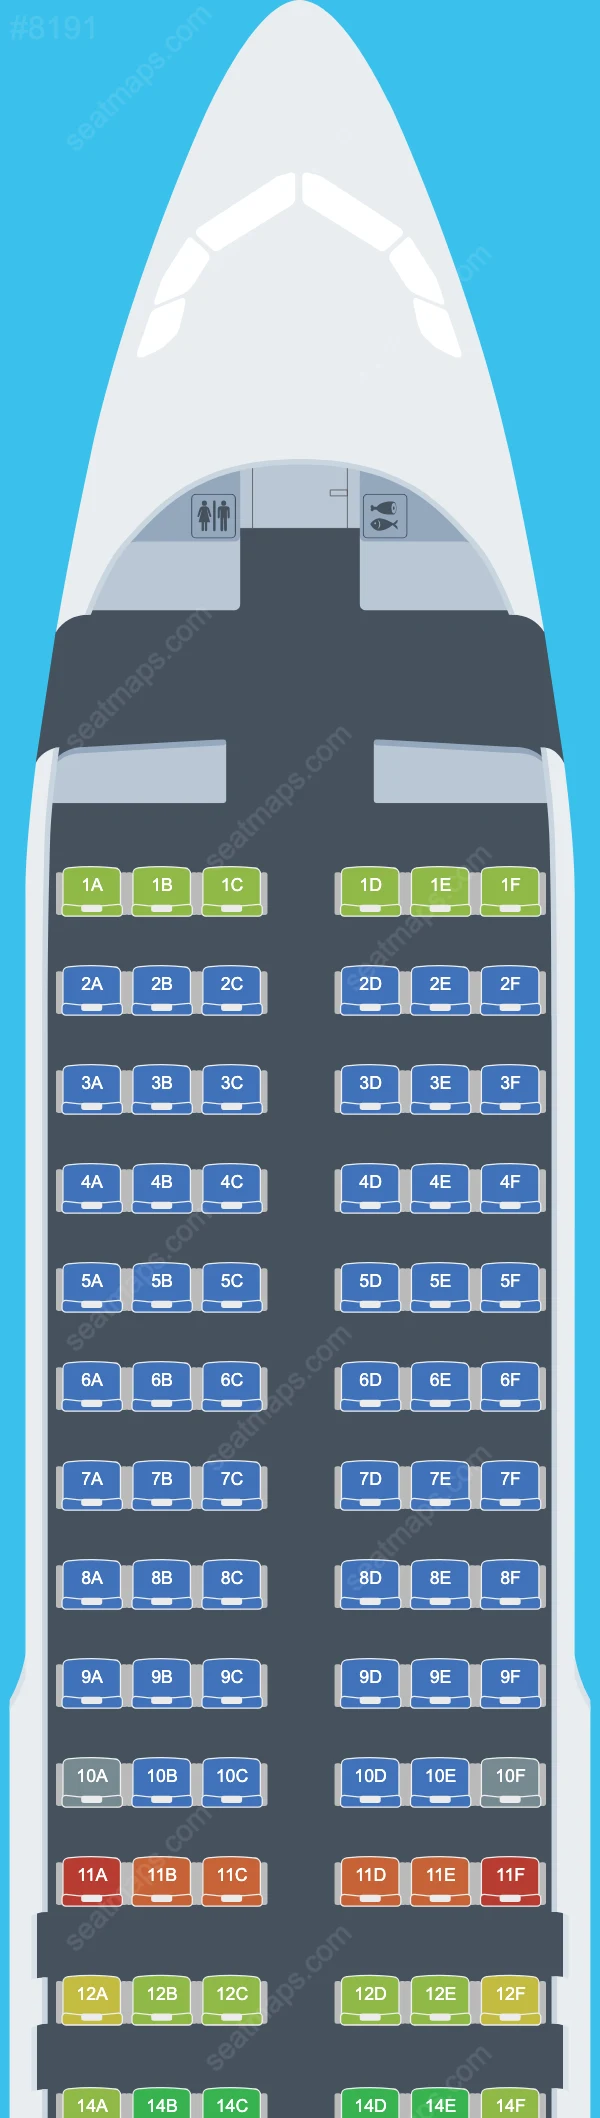 JetSMART Airbus A320 Seat Maps A320-200